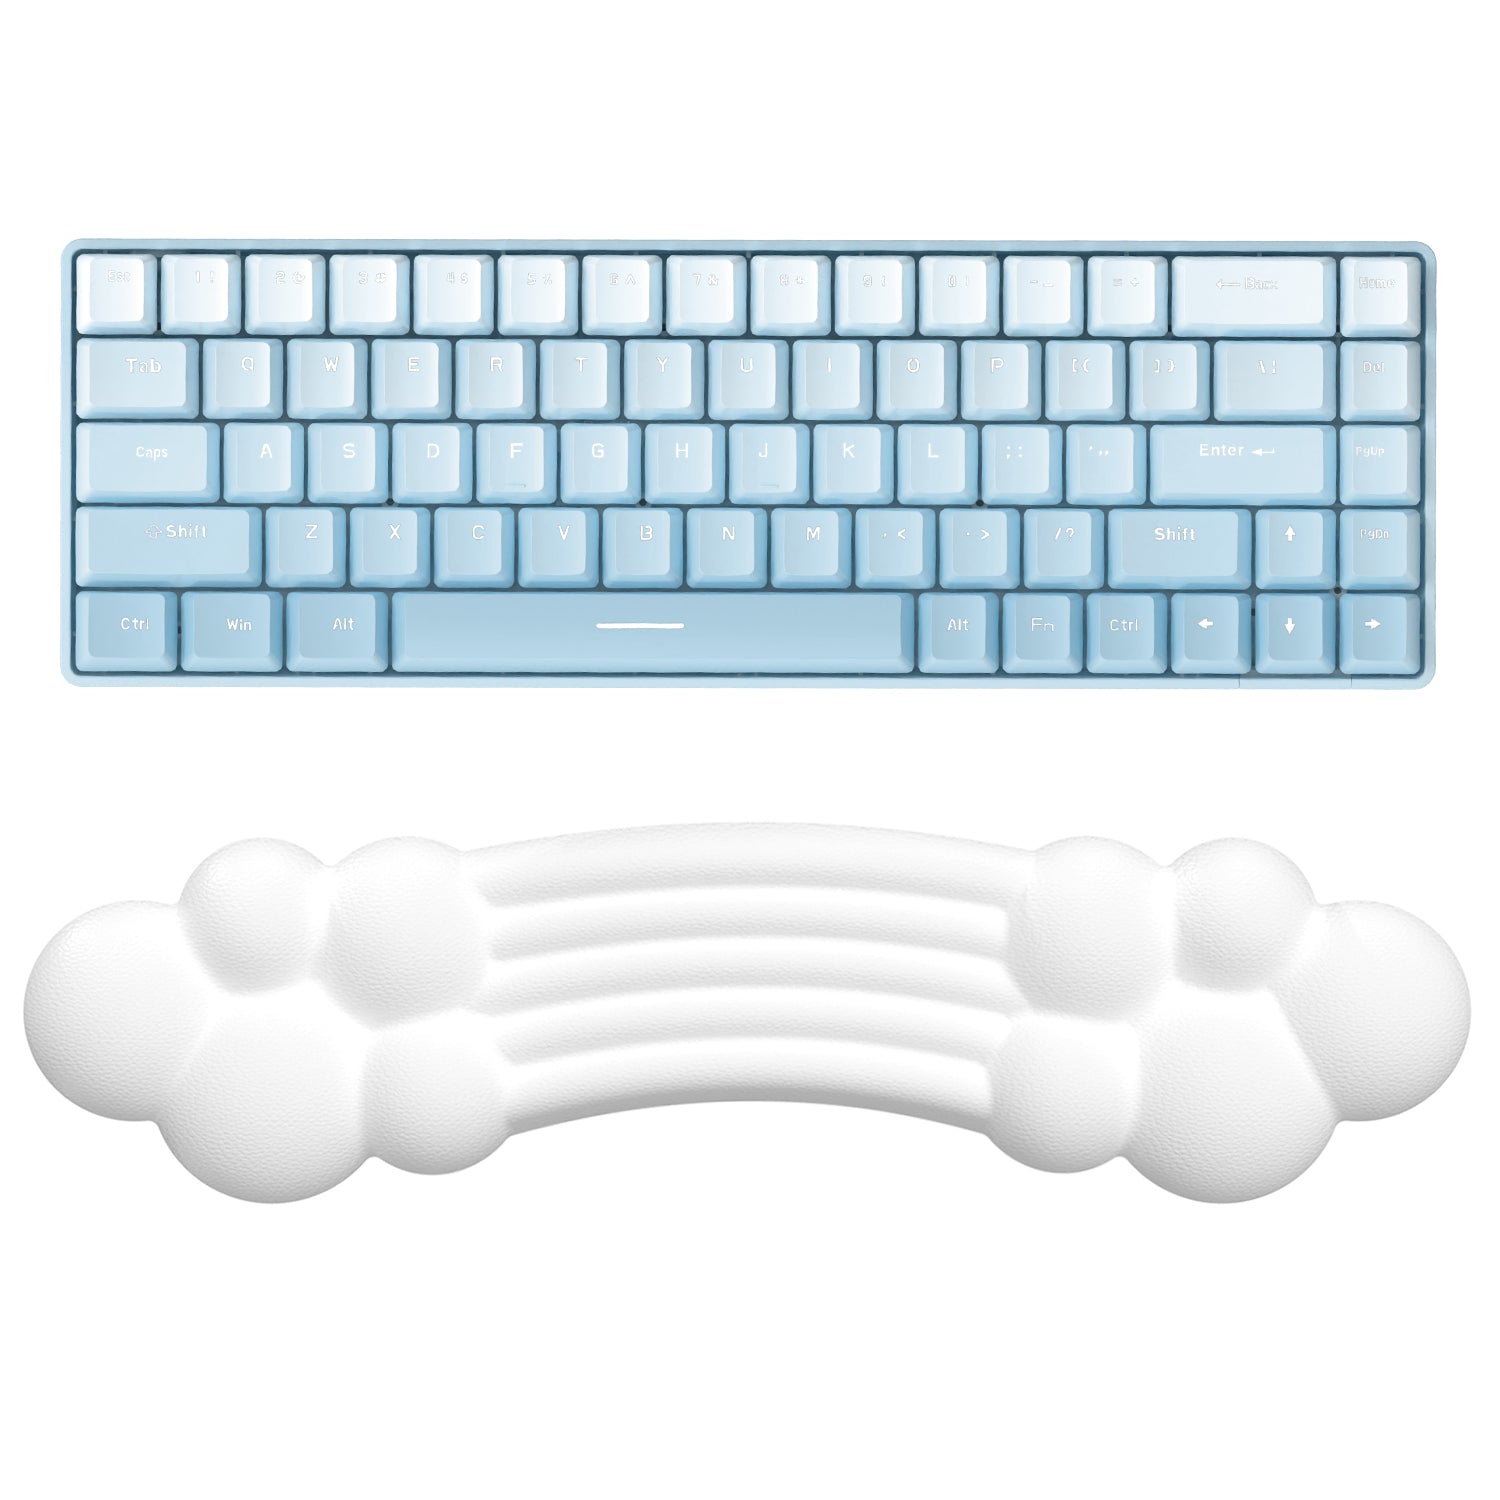 MAMBASNAKE Keyboard Cloud Wrist Rest, Memory Foam, Non-Slip Base for Typing Pain Relief, Ergonomic Wrist Support for Home Office